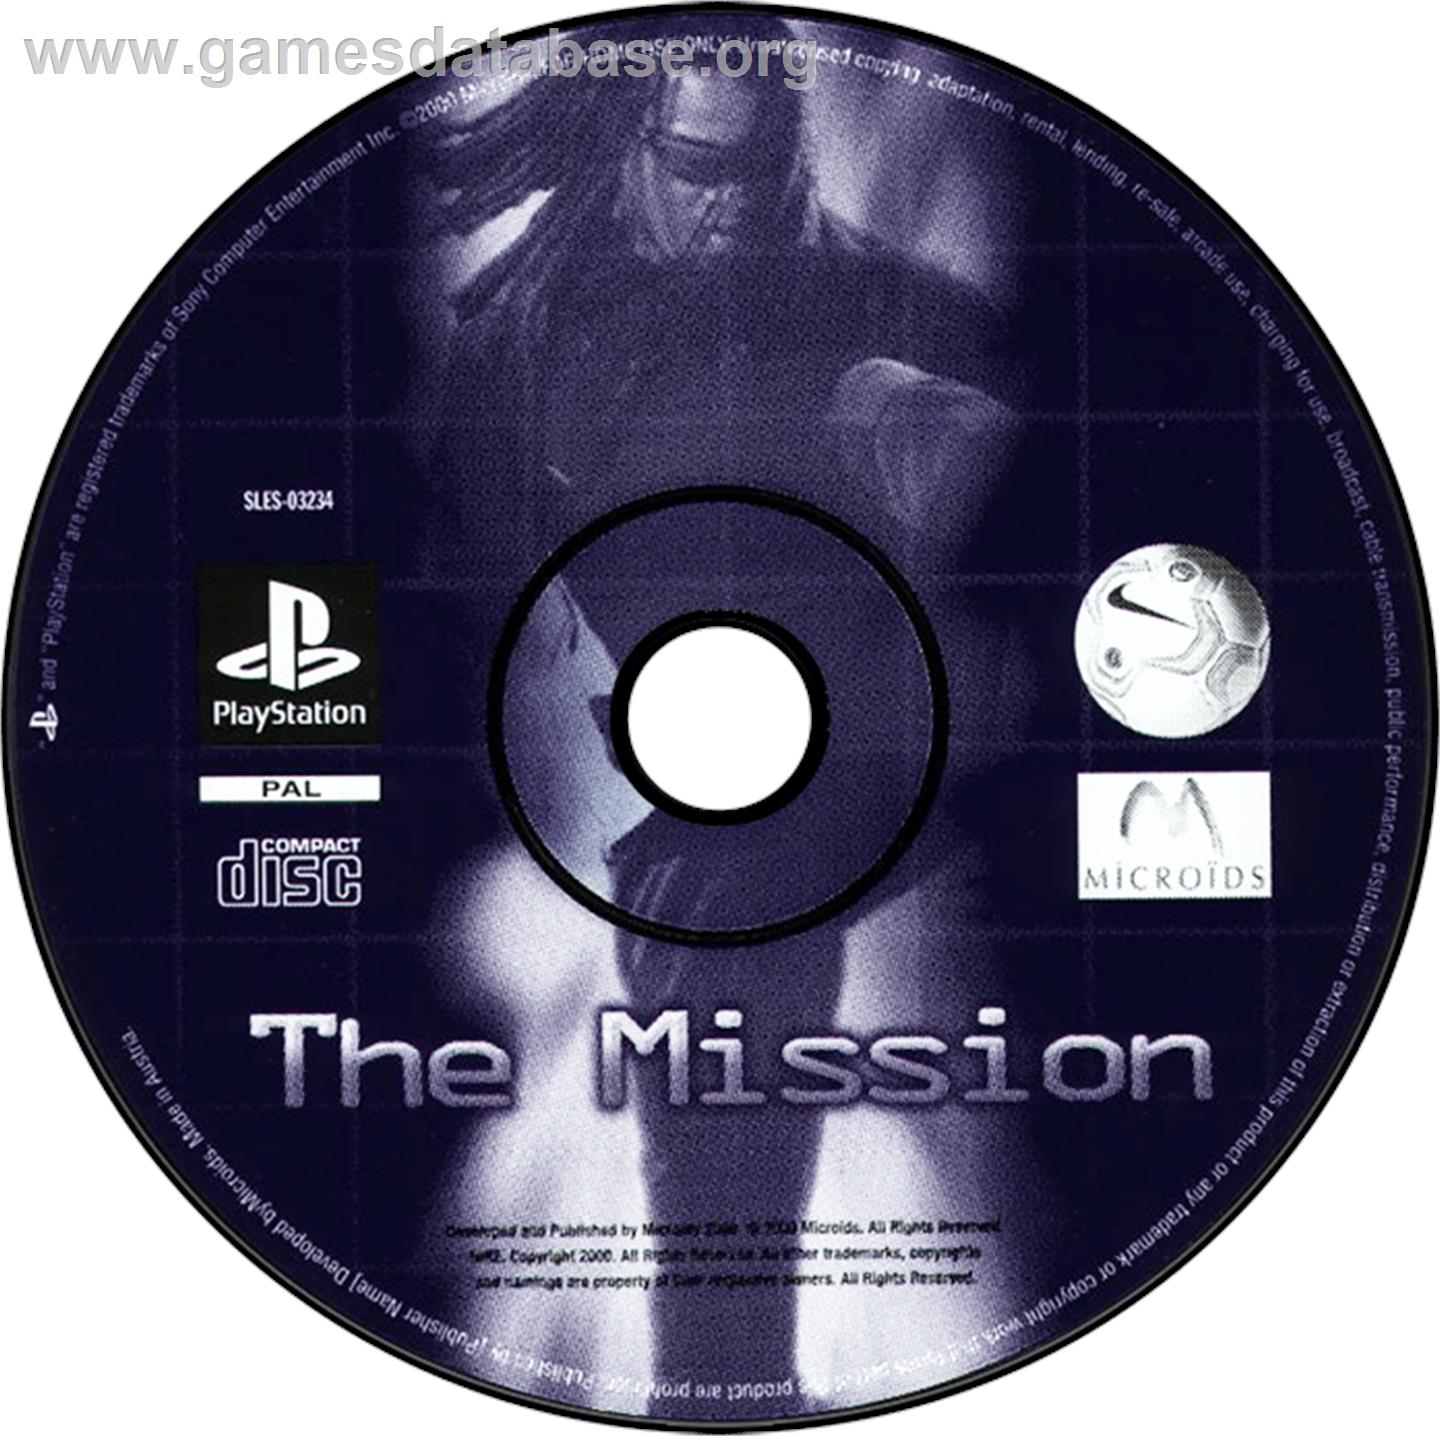 The Mission - Sony Playstation - Artwork - Disc